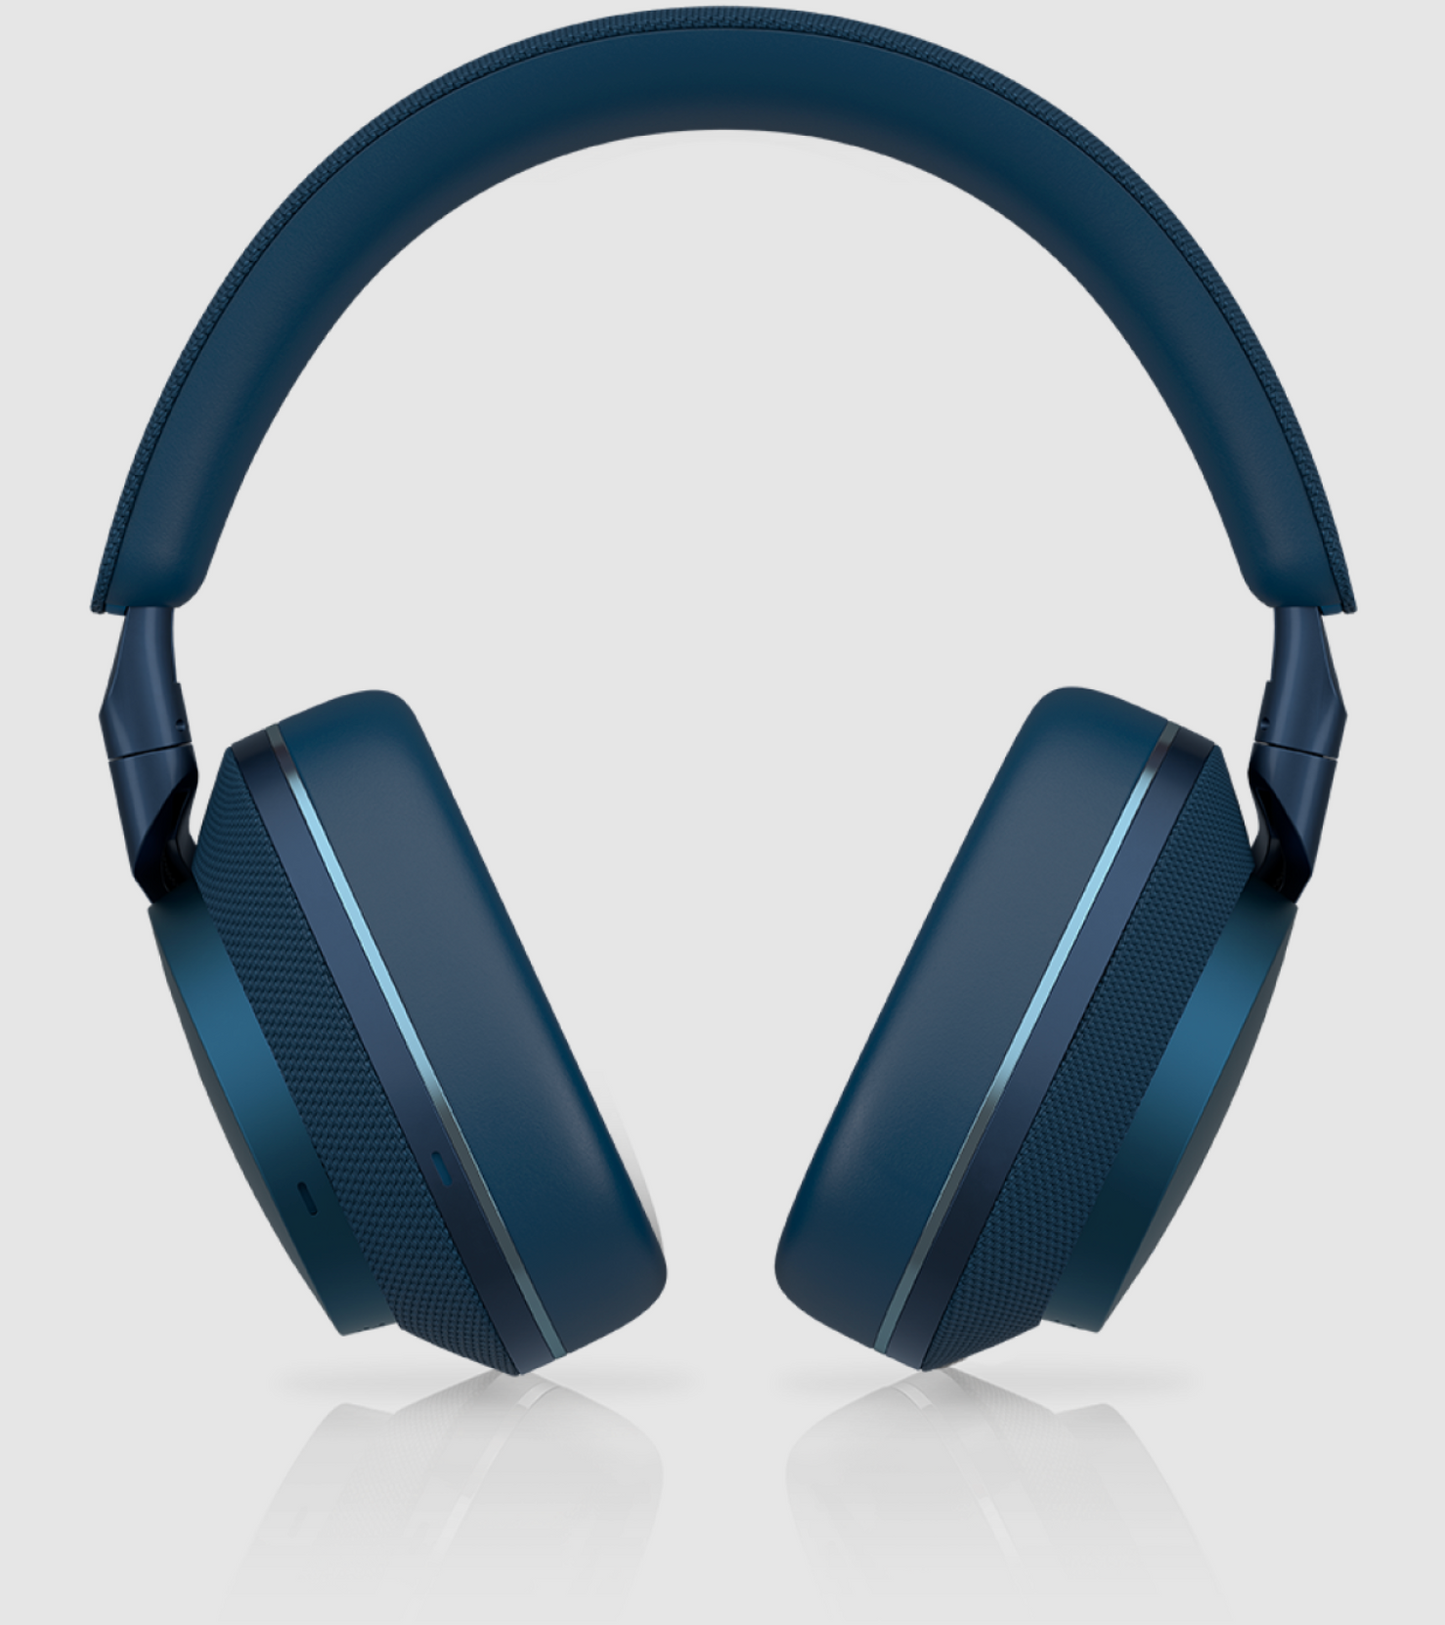 B&W Px7 S2e Noise Cancelling Headphones in Ocean Blue. Image of front